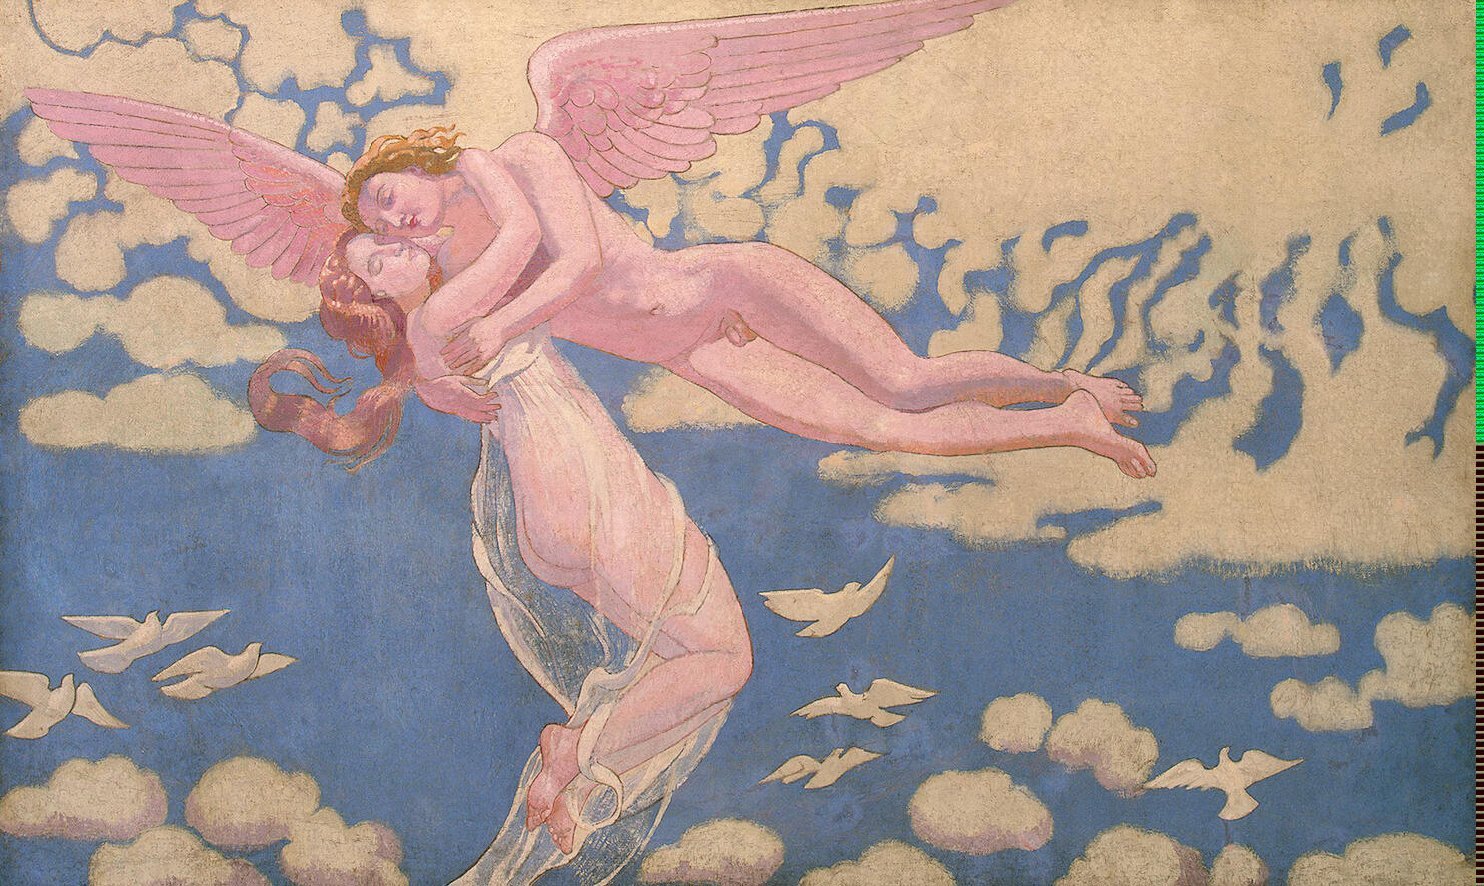 Panel 7 Cupid carrying Psyche up to heaven, 1908